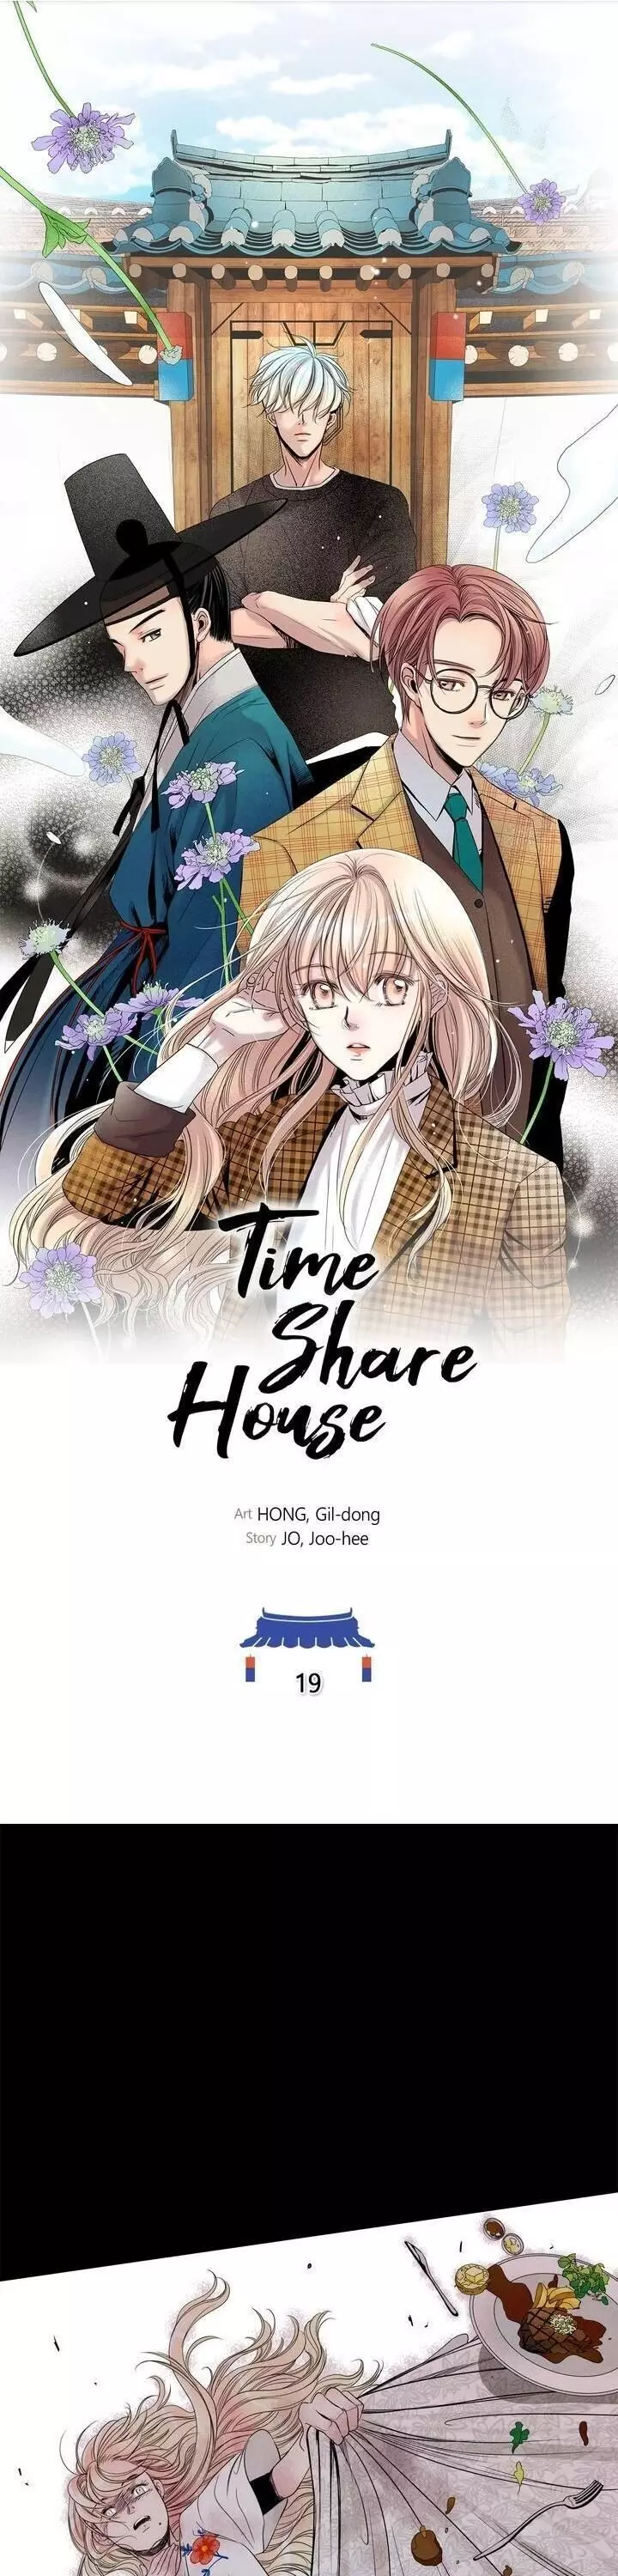 Time Share House - 19 page 1